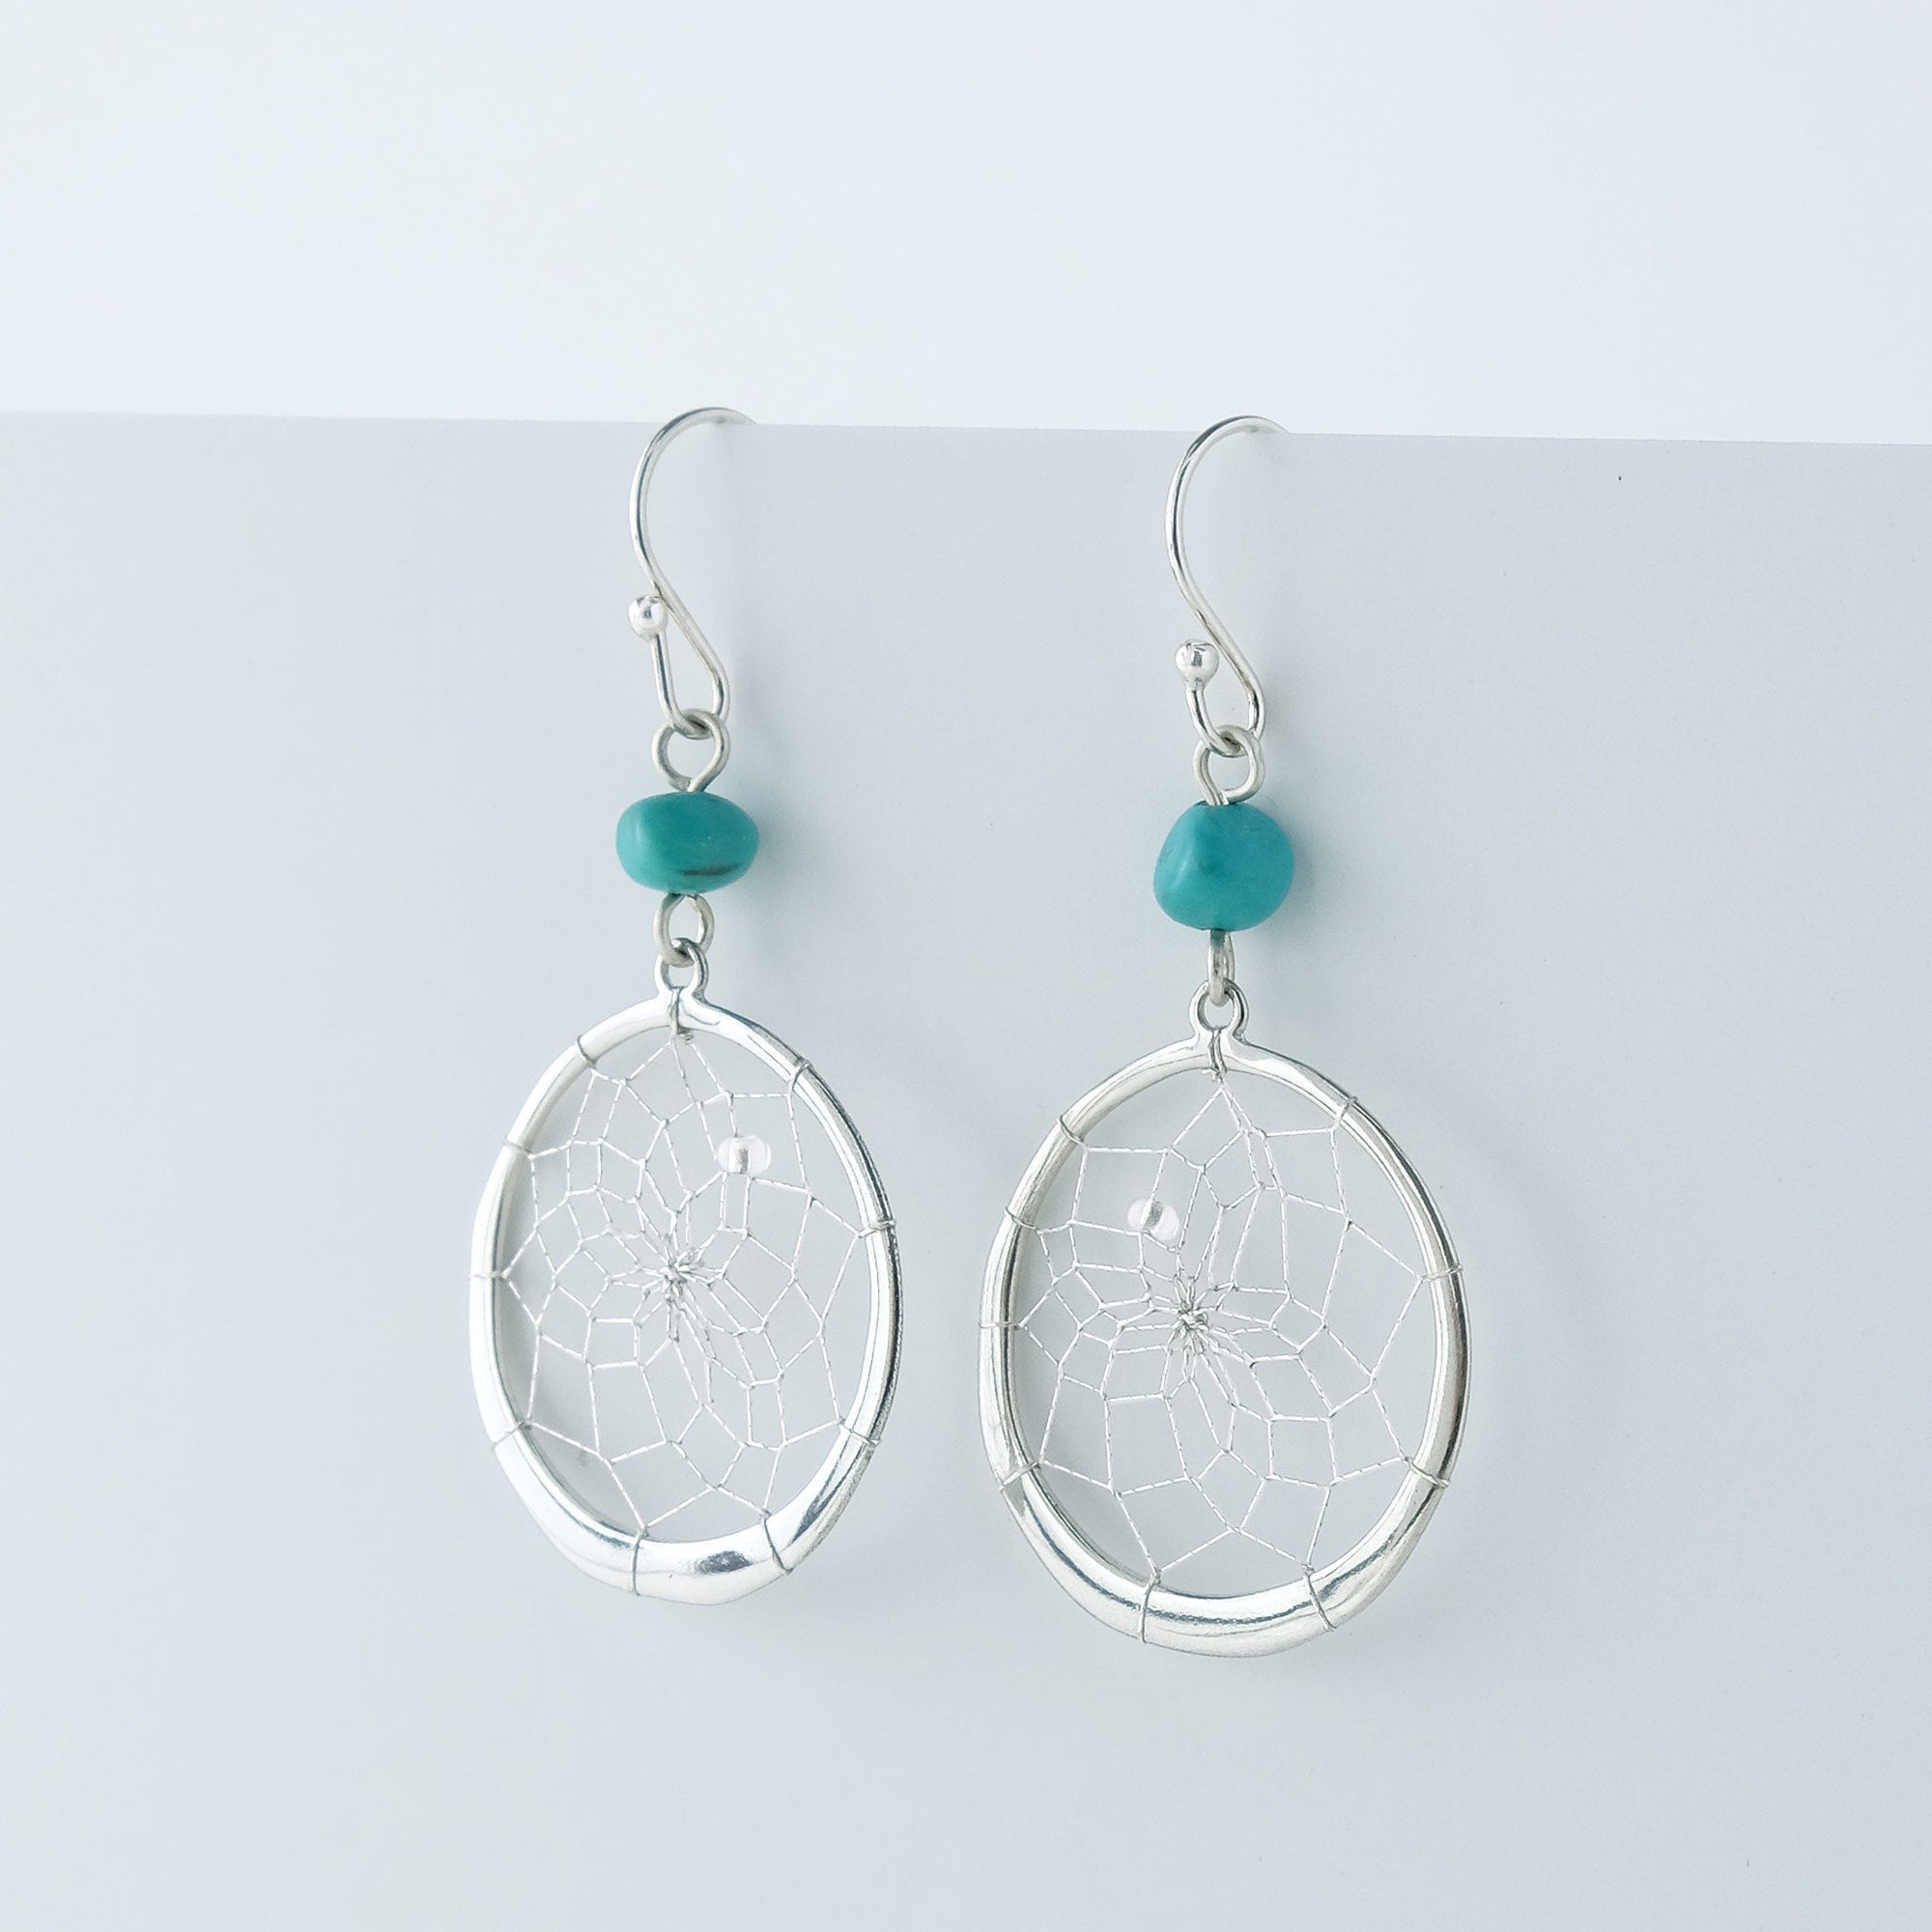 Steorra 1" Round Dream Catcher Earrings with Turquoise Stones